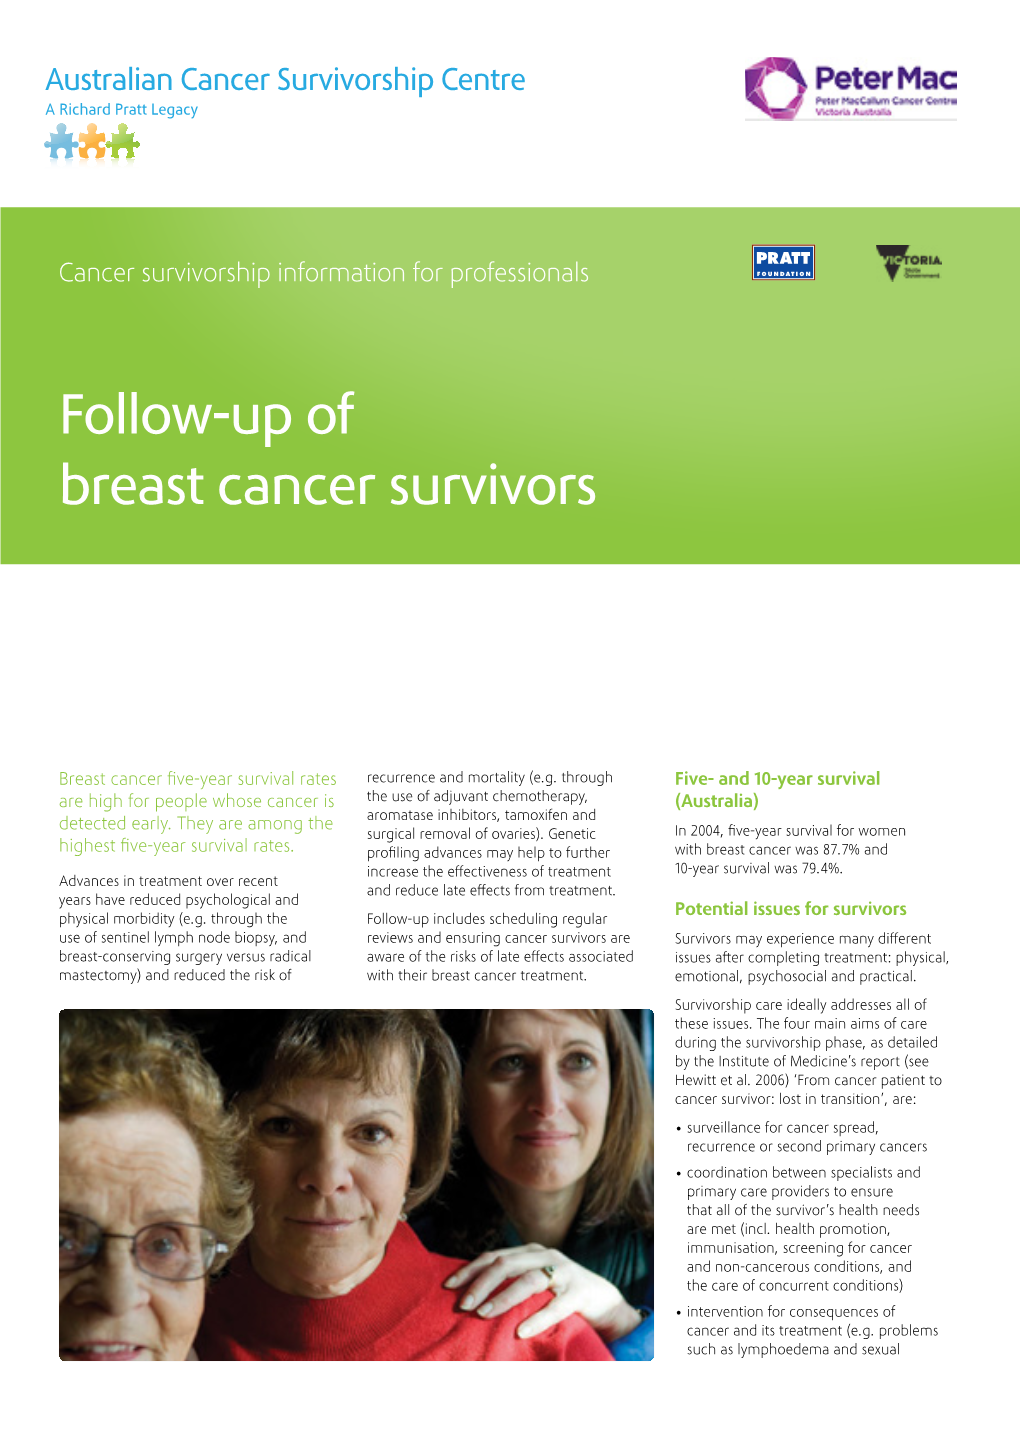 Follow-Up of Breast Cancer Survivors